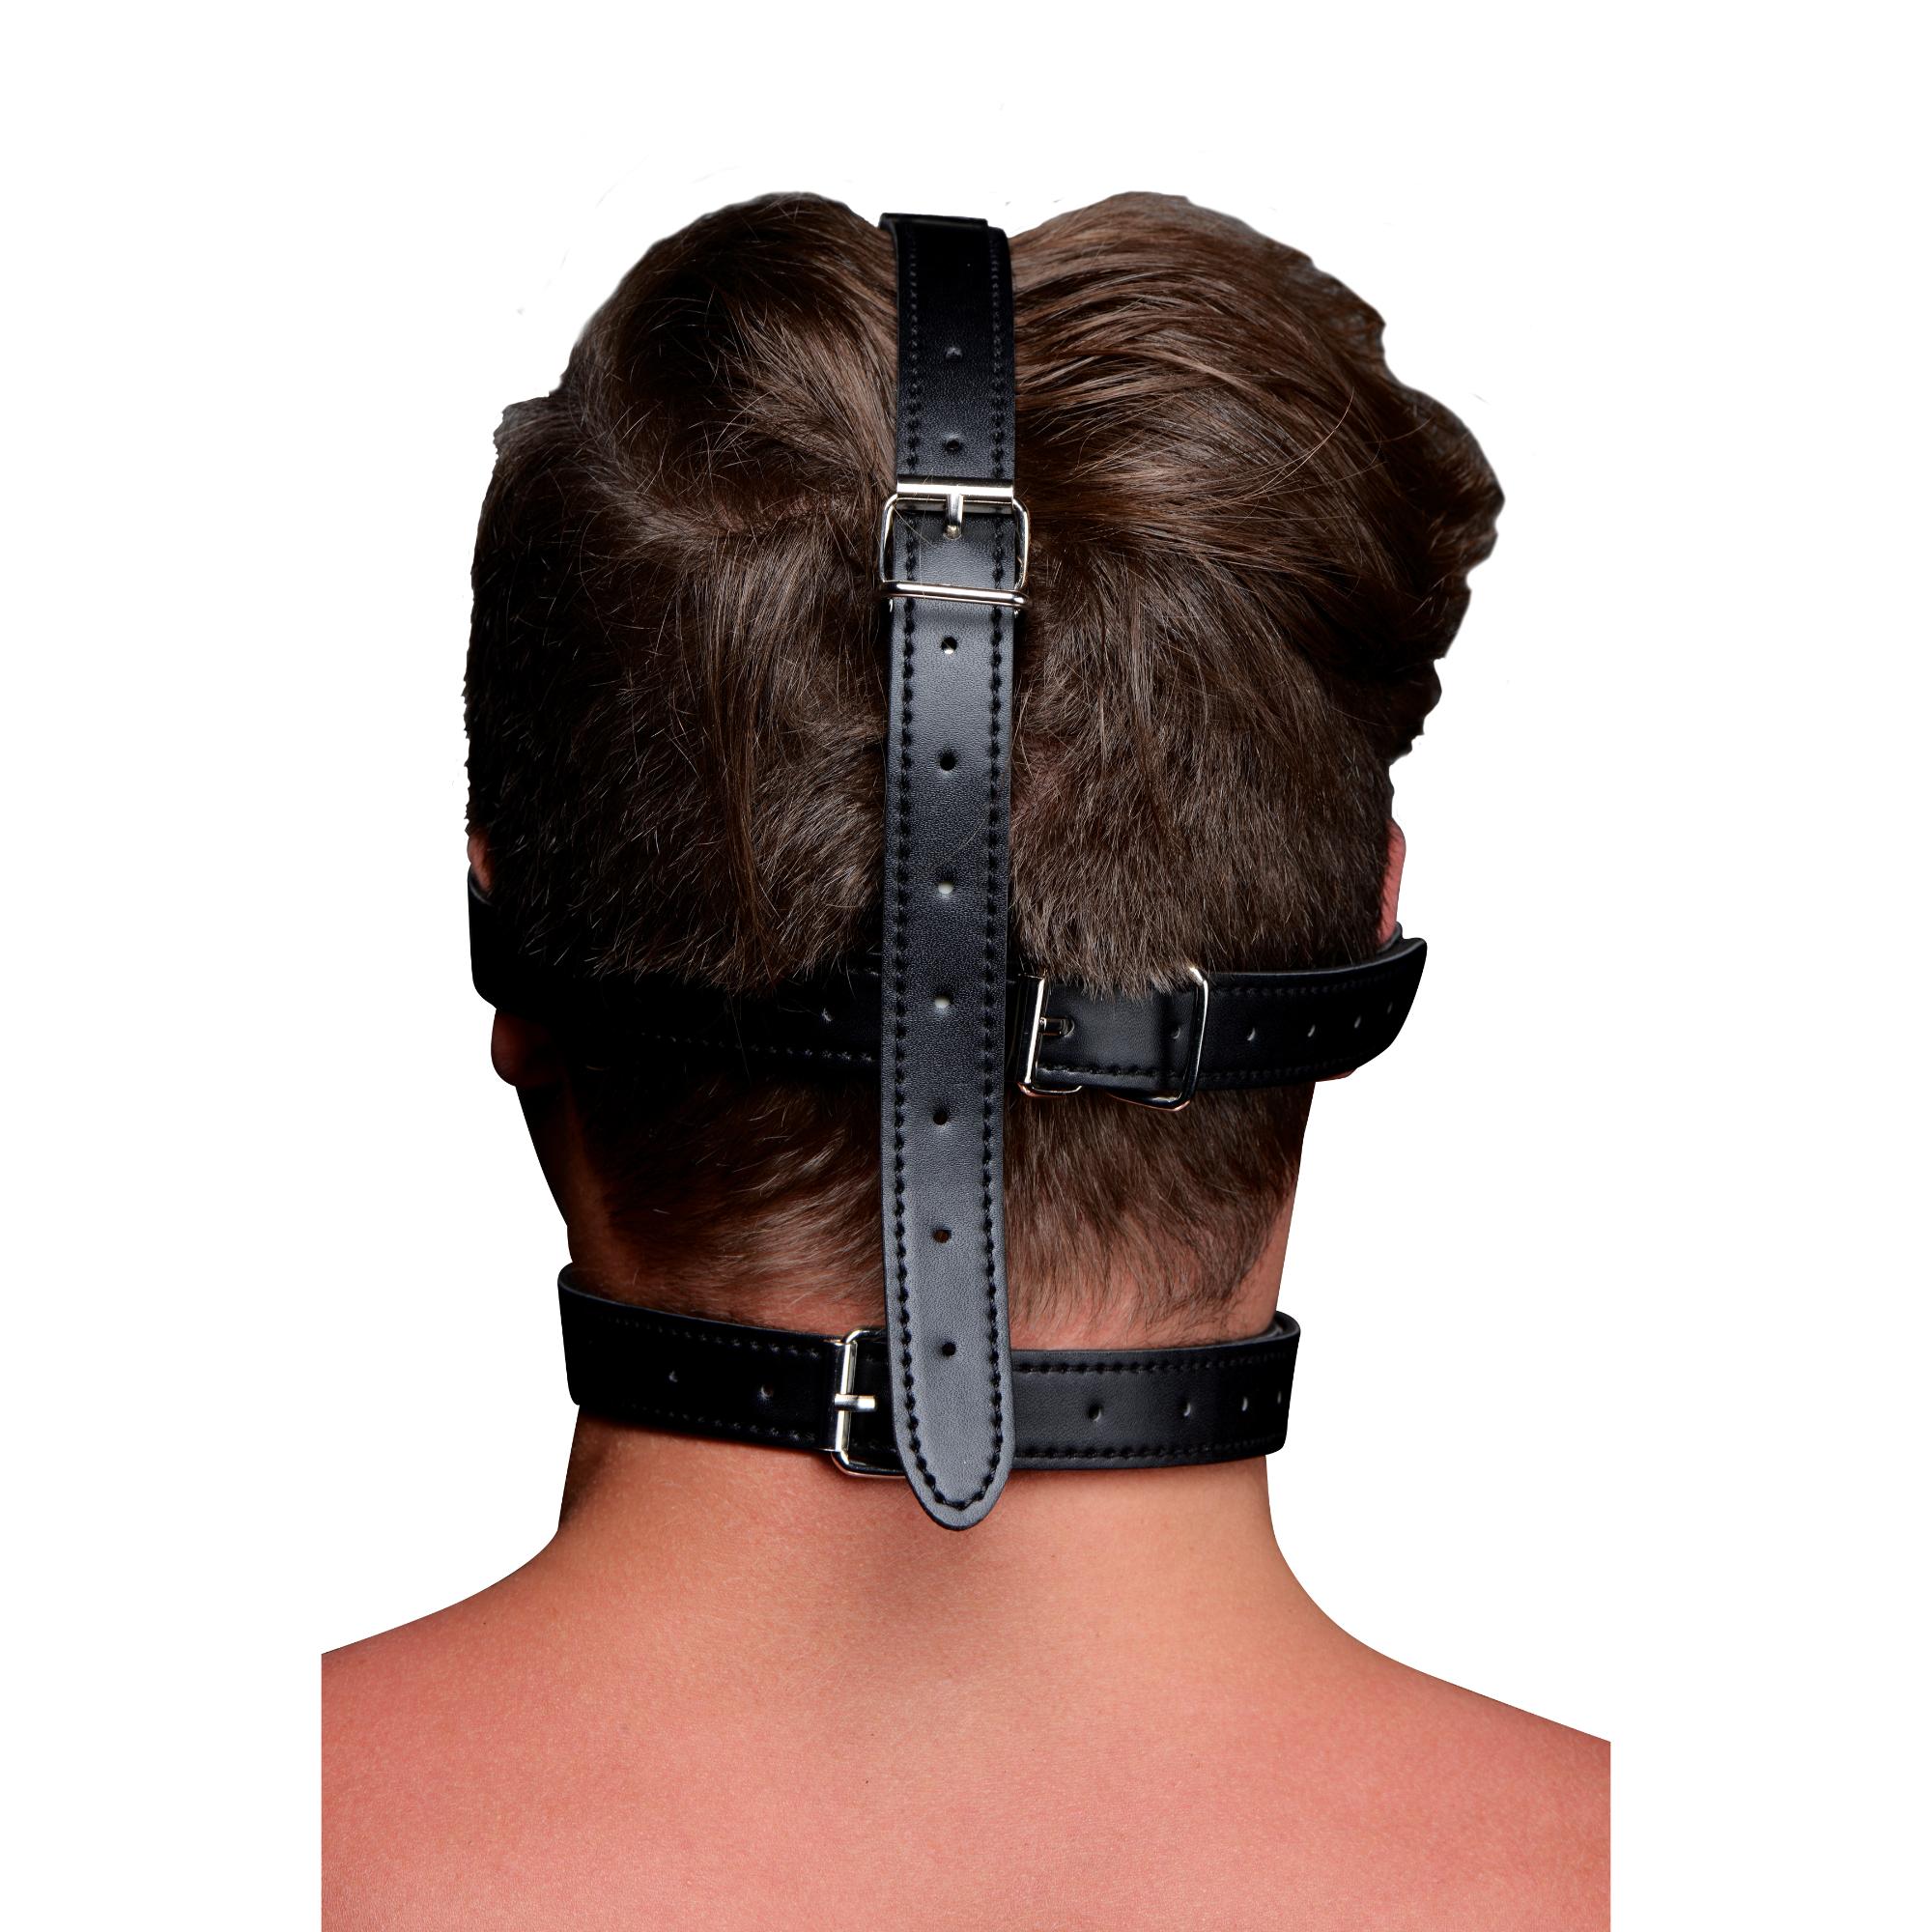 STRICT Eye Mask Harness with Ball Gag